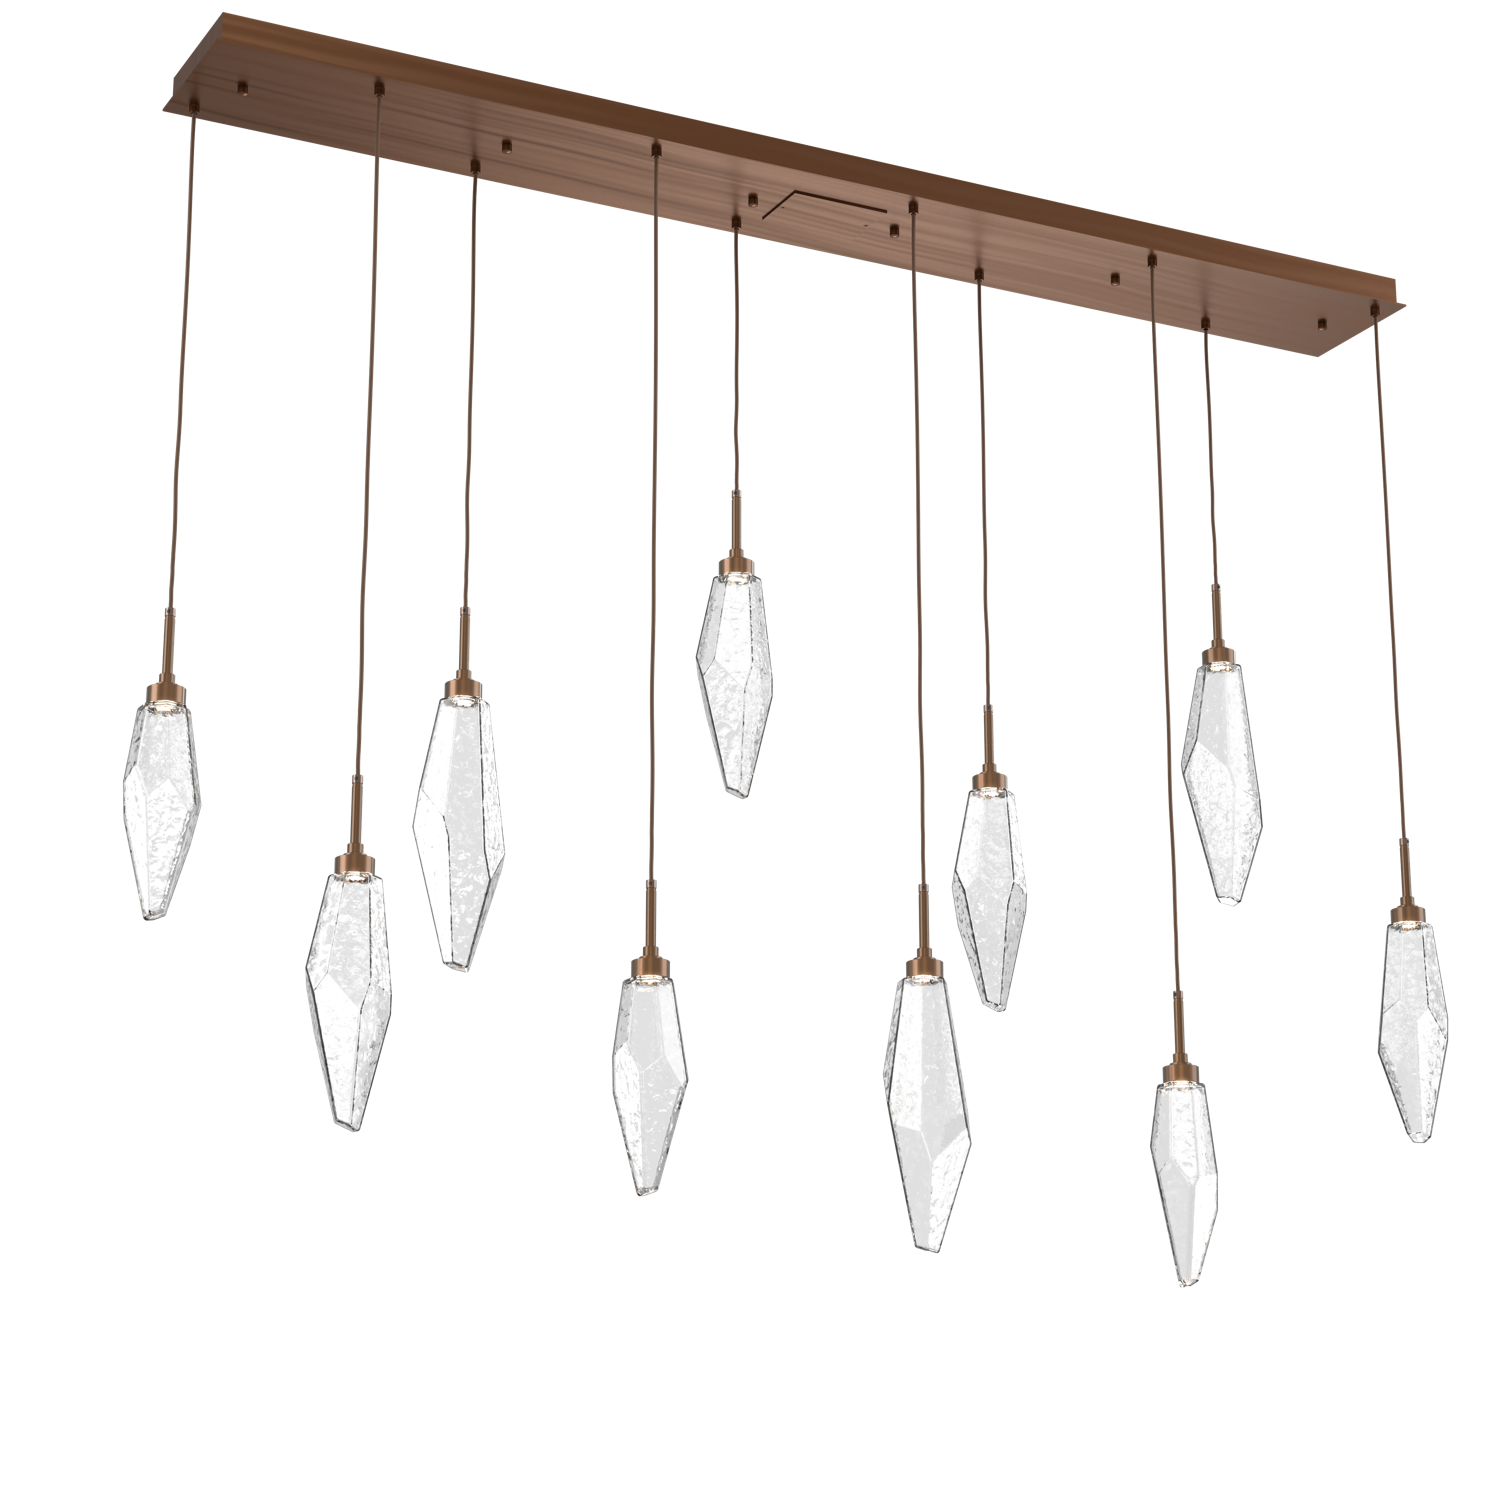 PLB0050-10-RB-CC-Hammerton-Studio-Rock-Crystal-10-light-linear-pendant-chandelier-with-oil-rubbed-bronze-finish-and-clear-glass-shades-and-LED-lamping